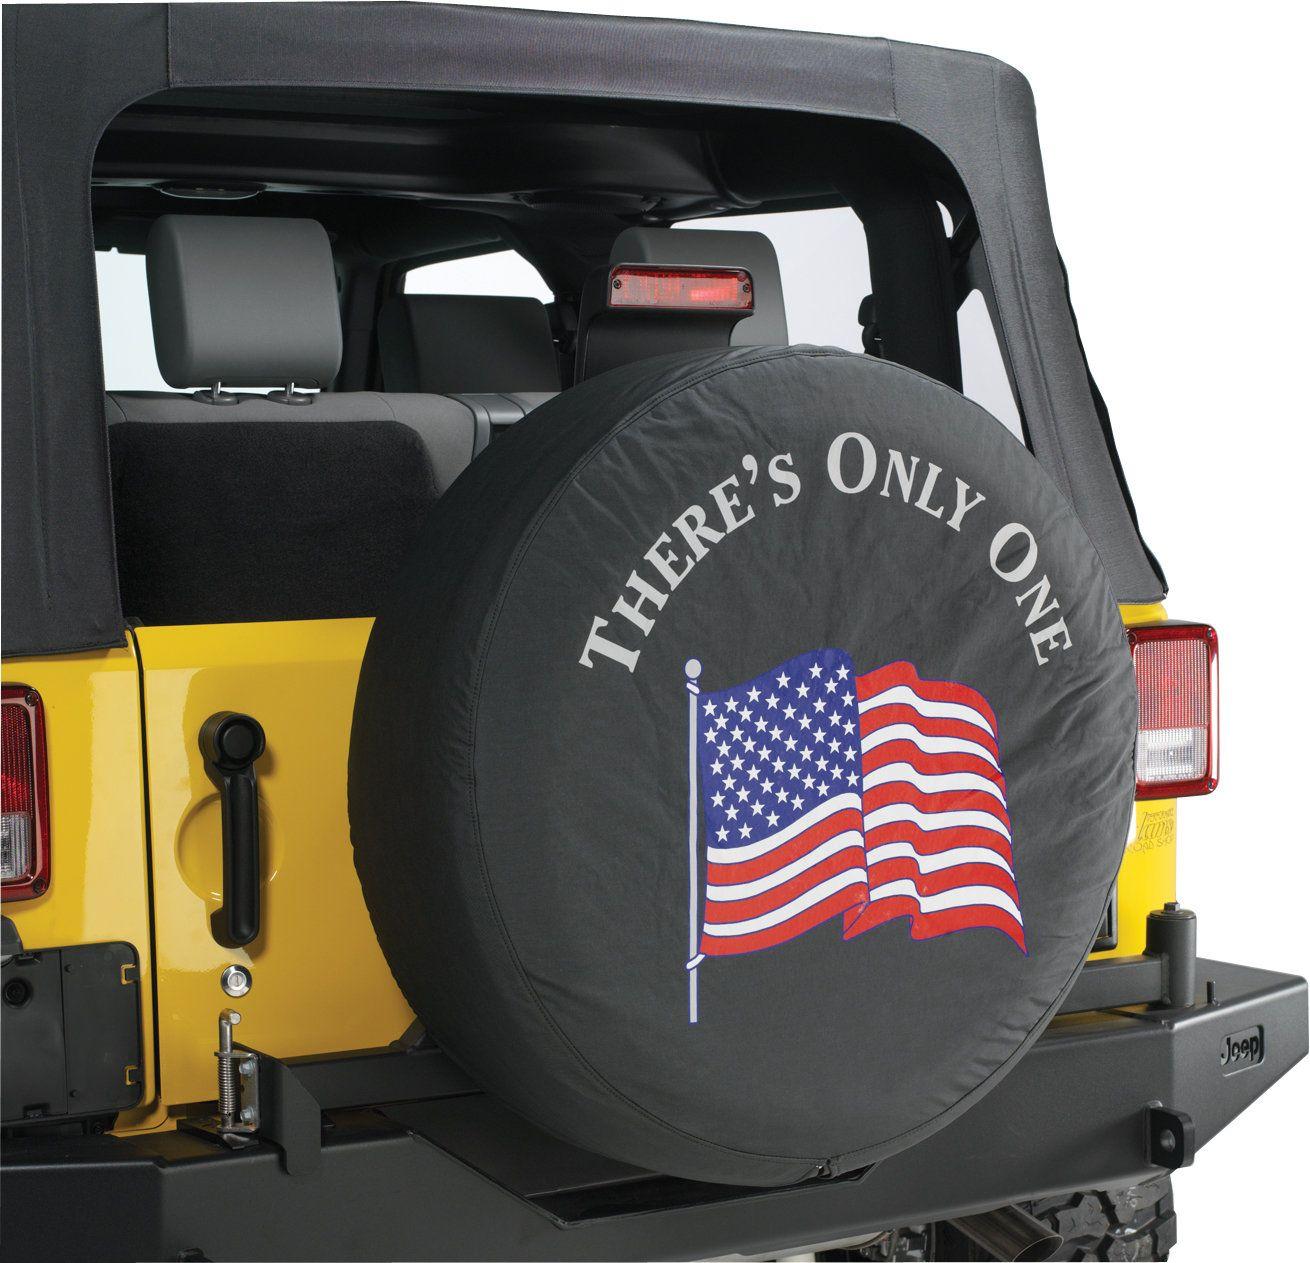 Only in a Jeep Logo - Mopar Jeep Logo Tire Covers in Black Denim with American Flag